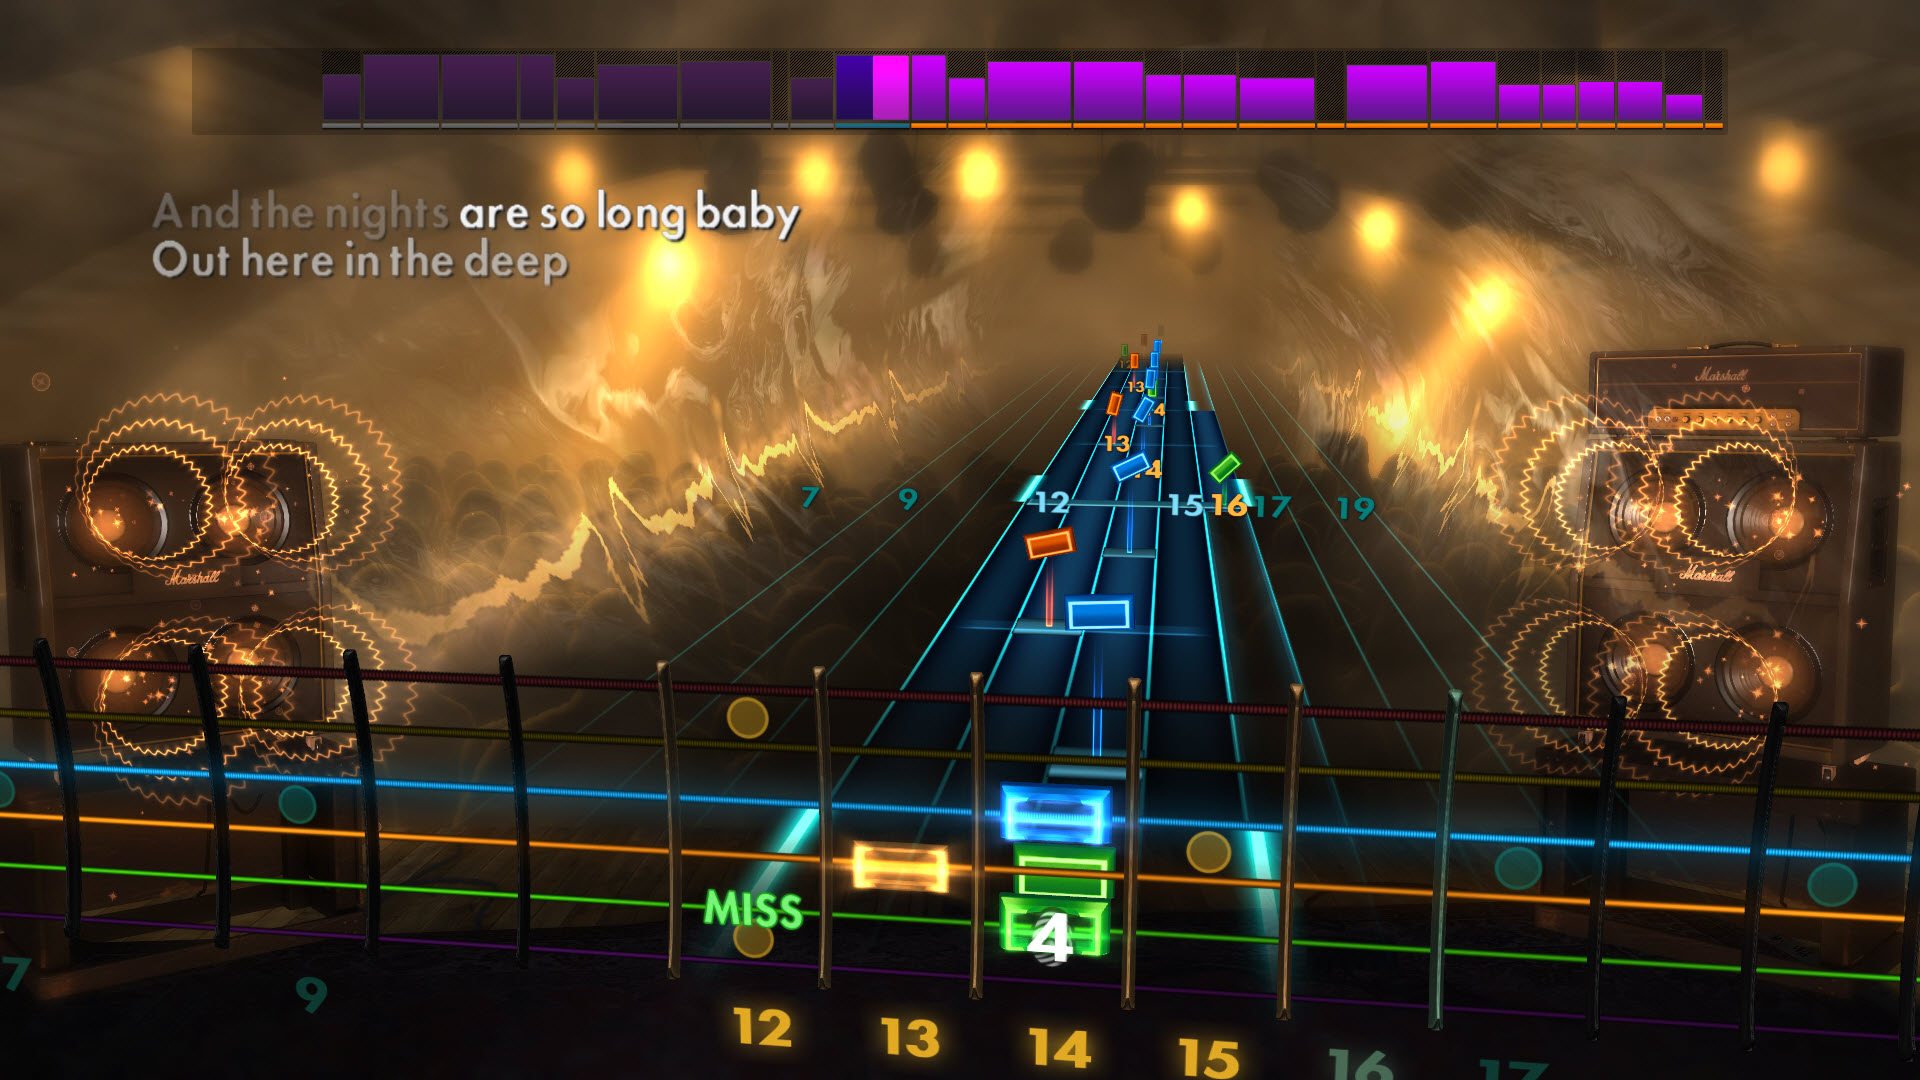 rocksmith 2014 edition remastered no cable patch